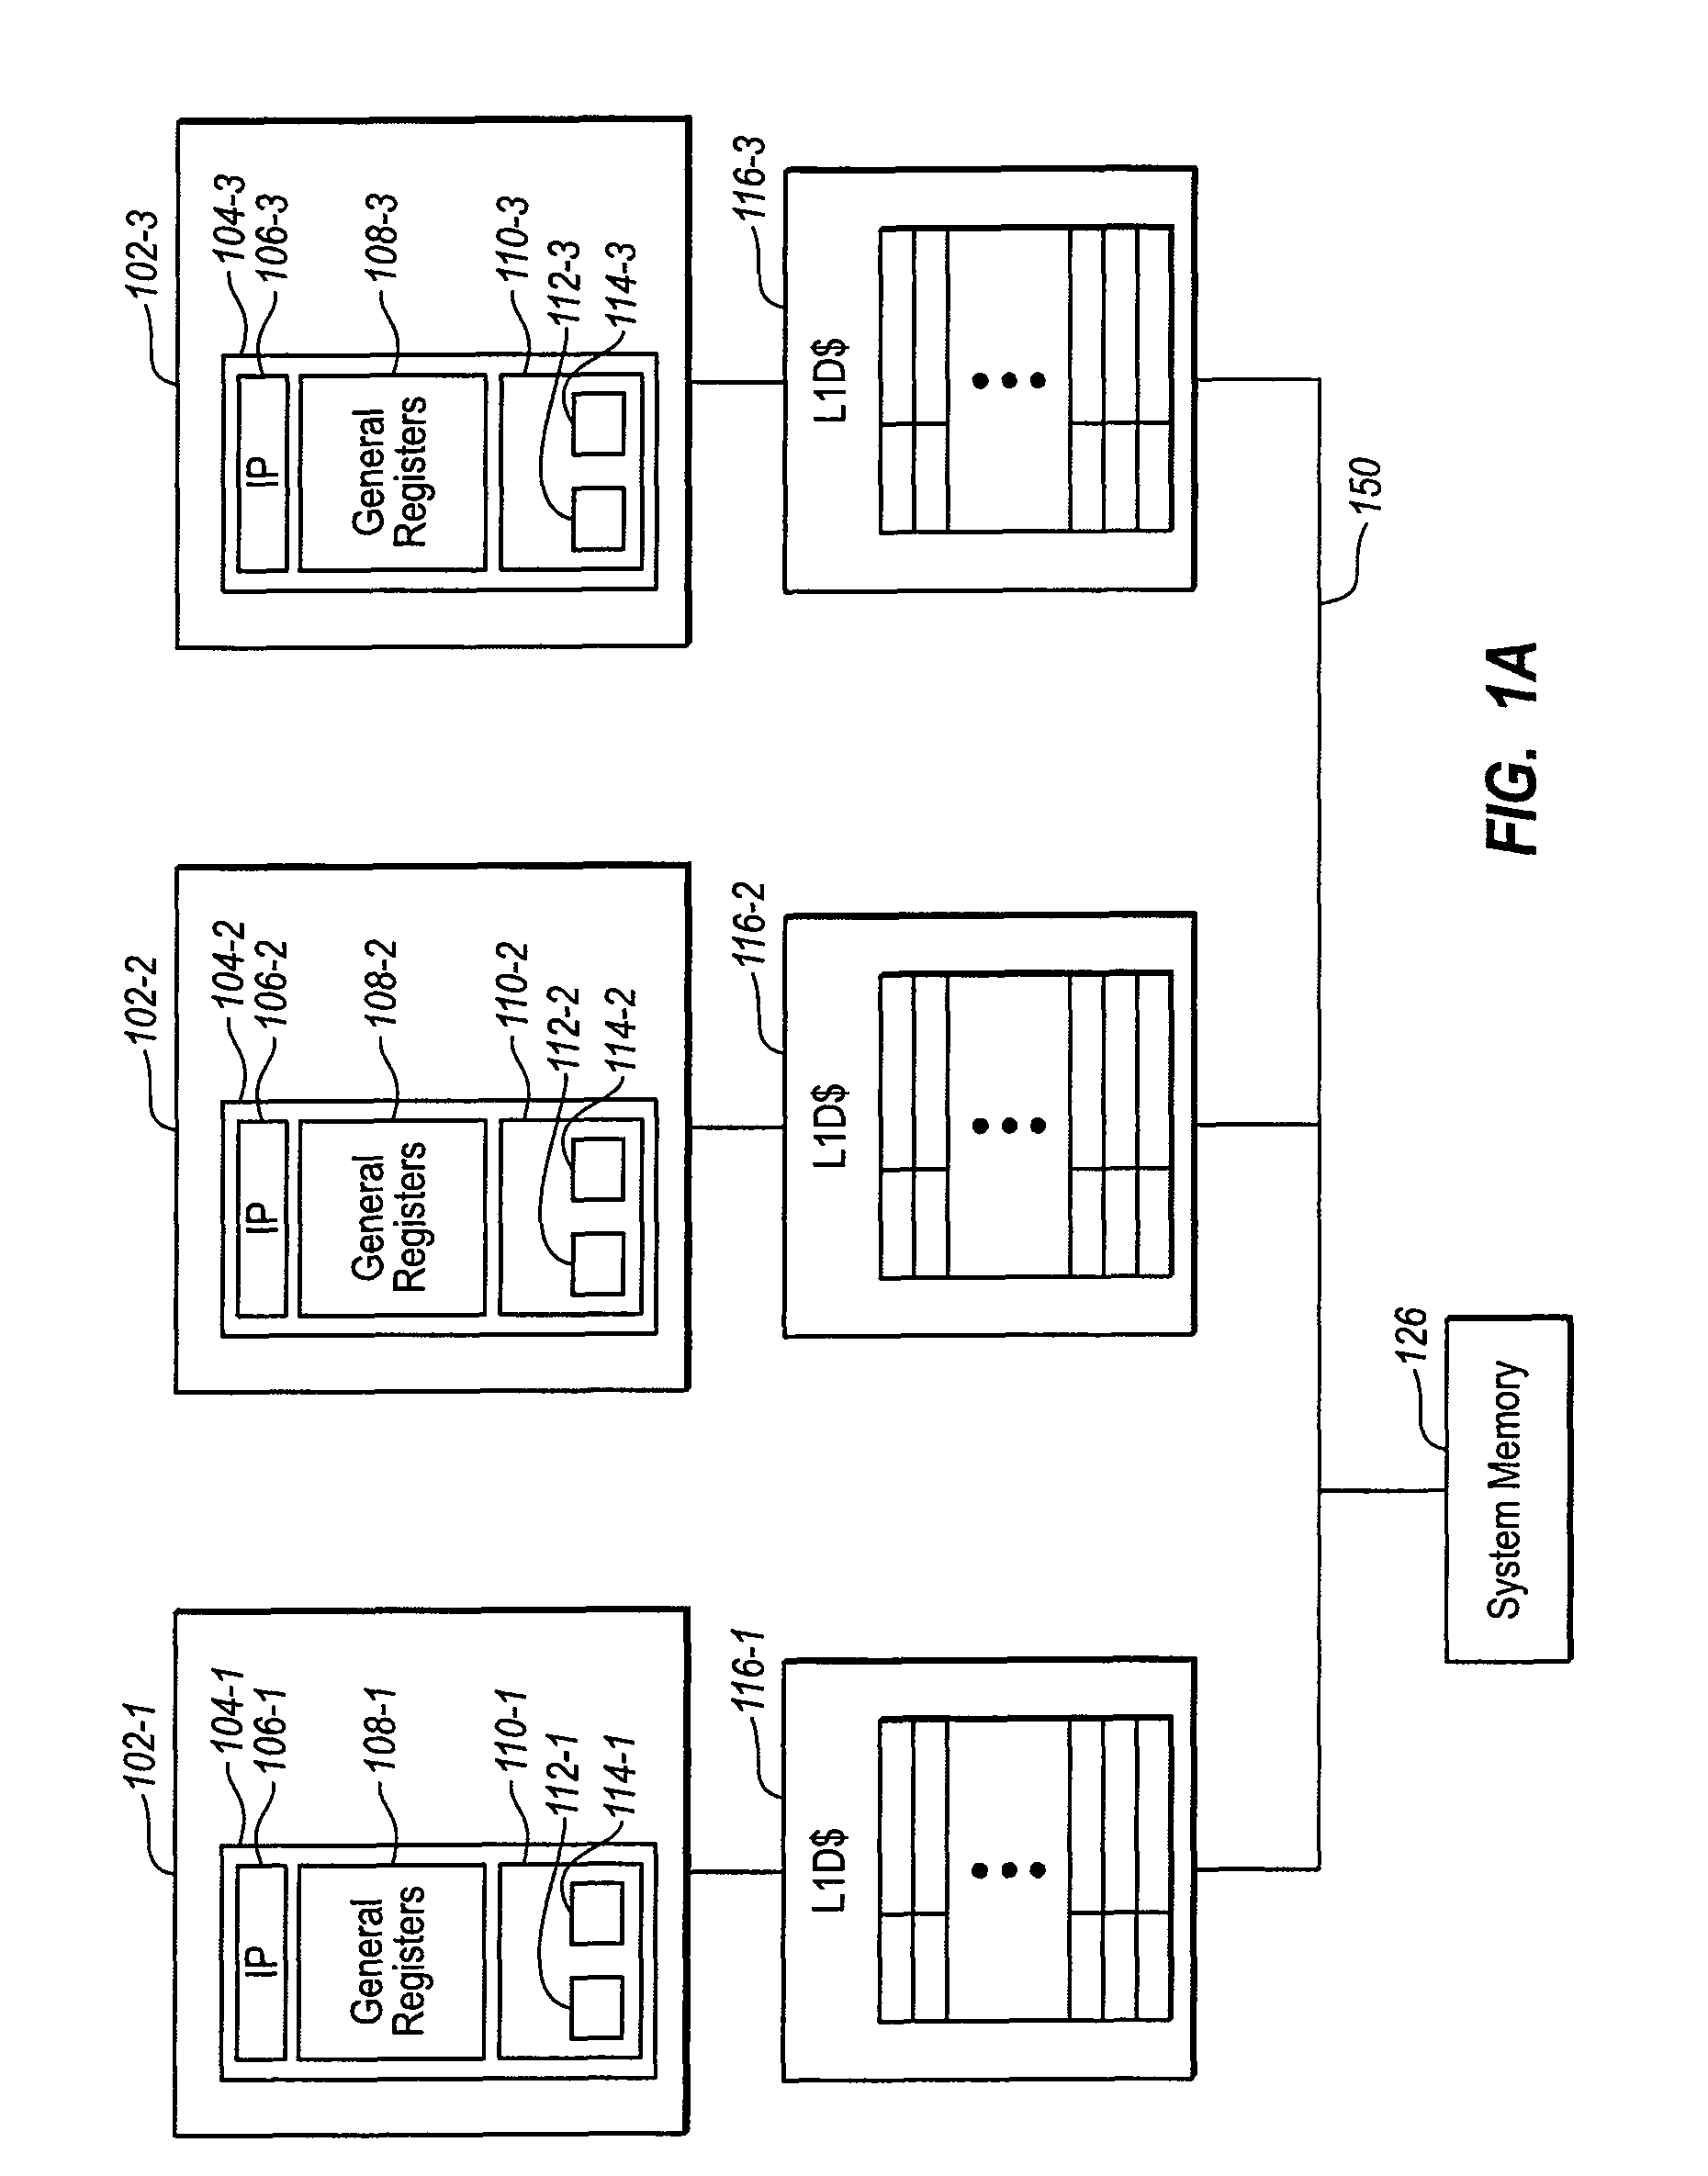 Minimizing code duplication in an unbounded transactional memory system by using mode agnostic transactional read and write barriers